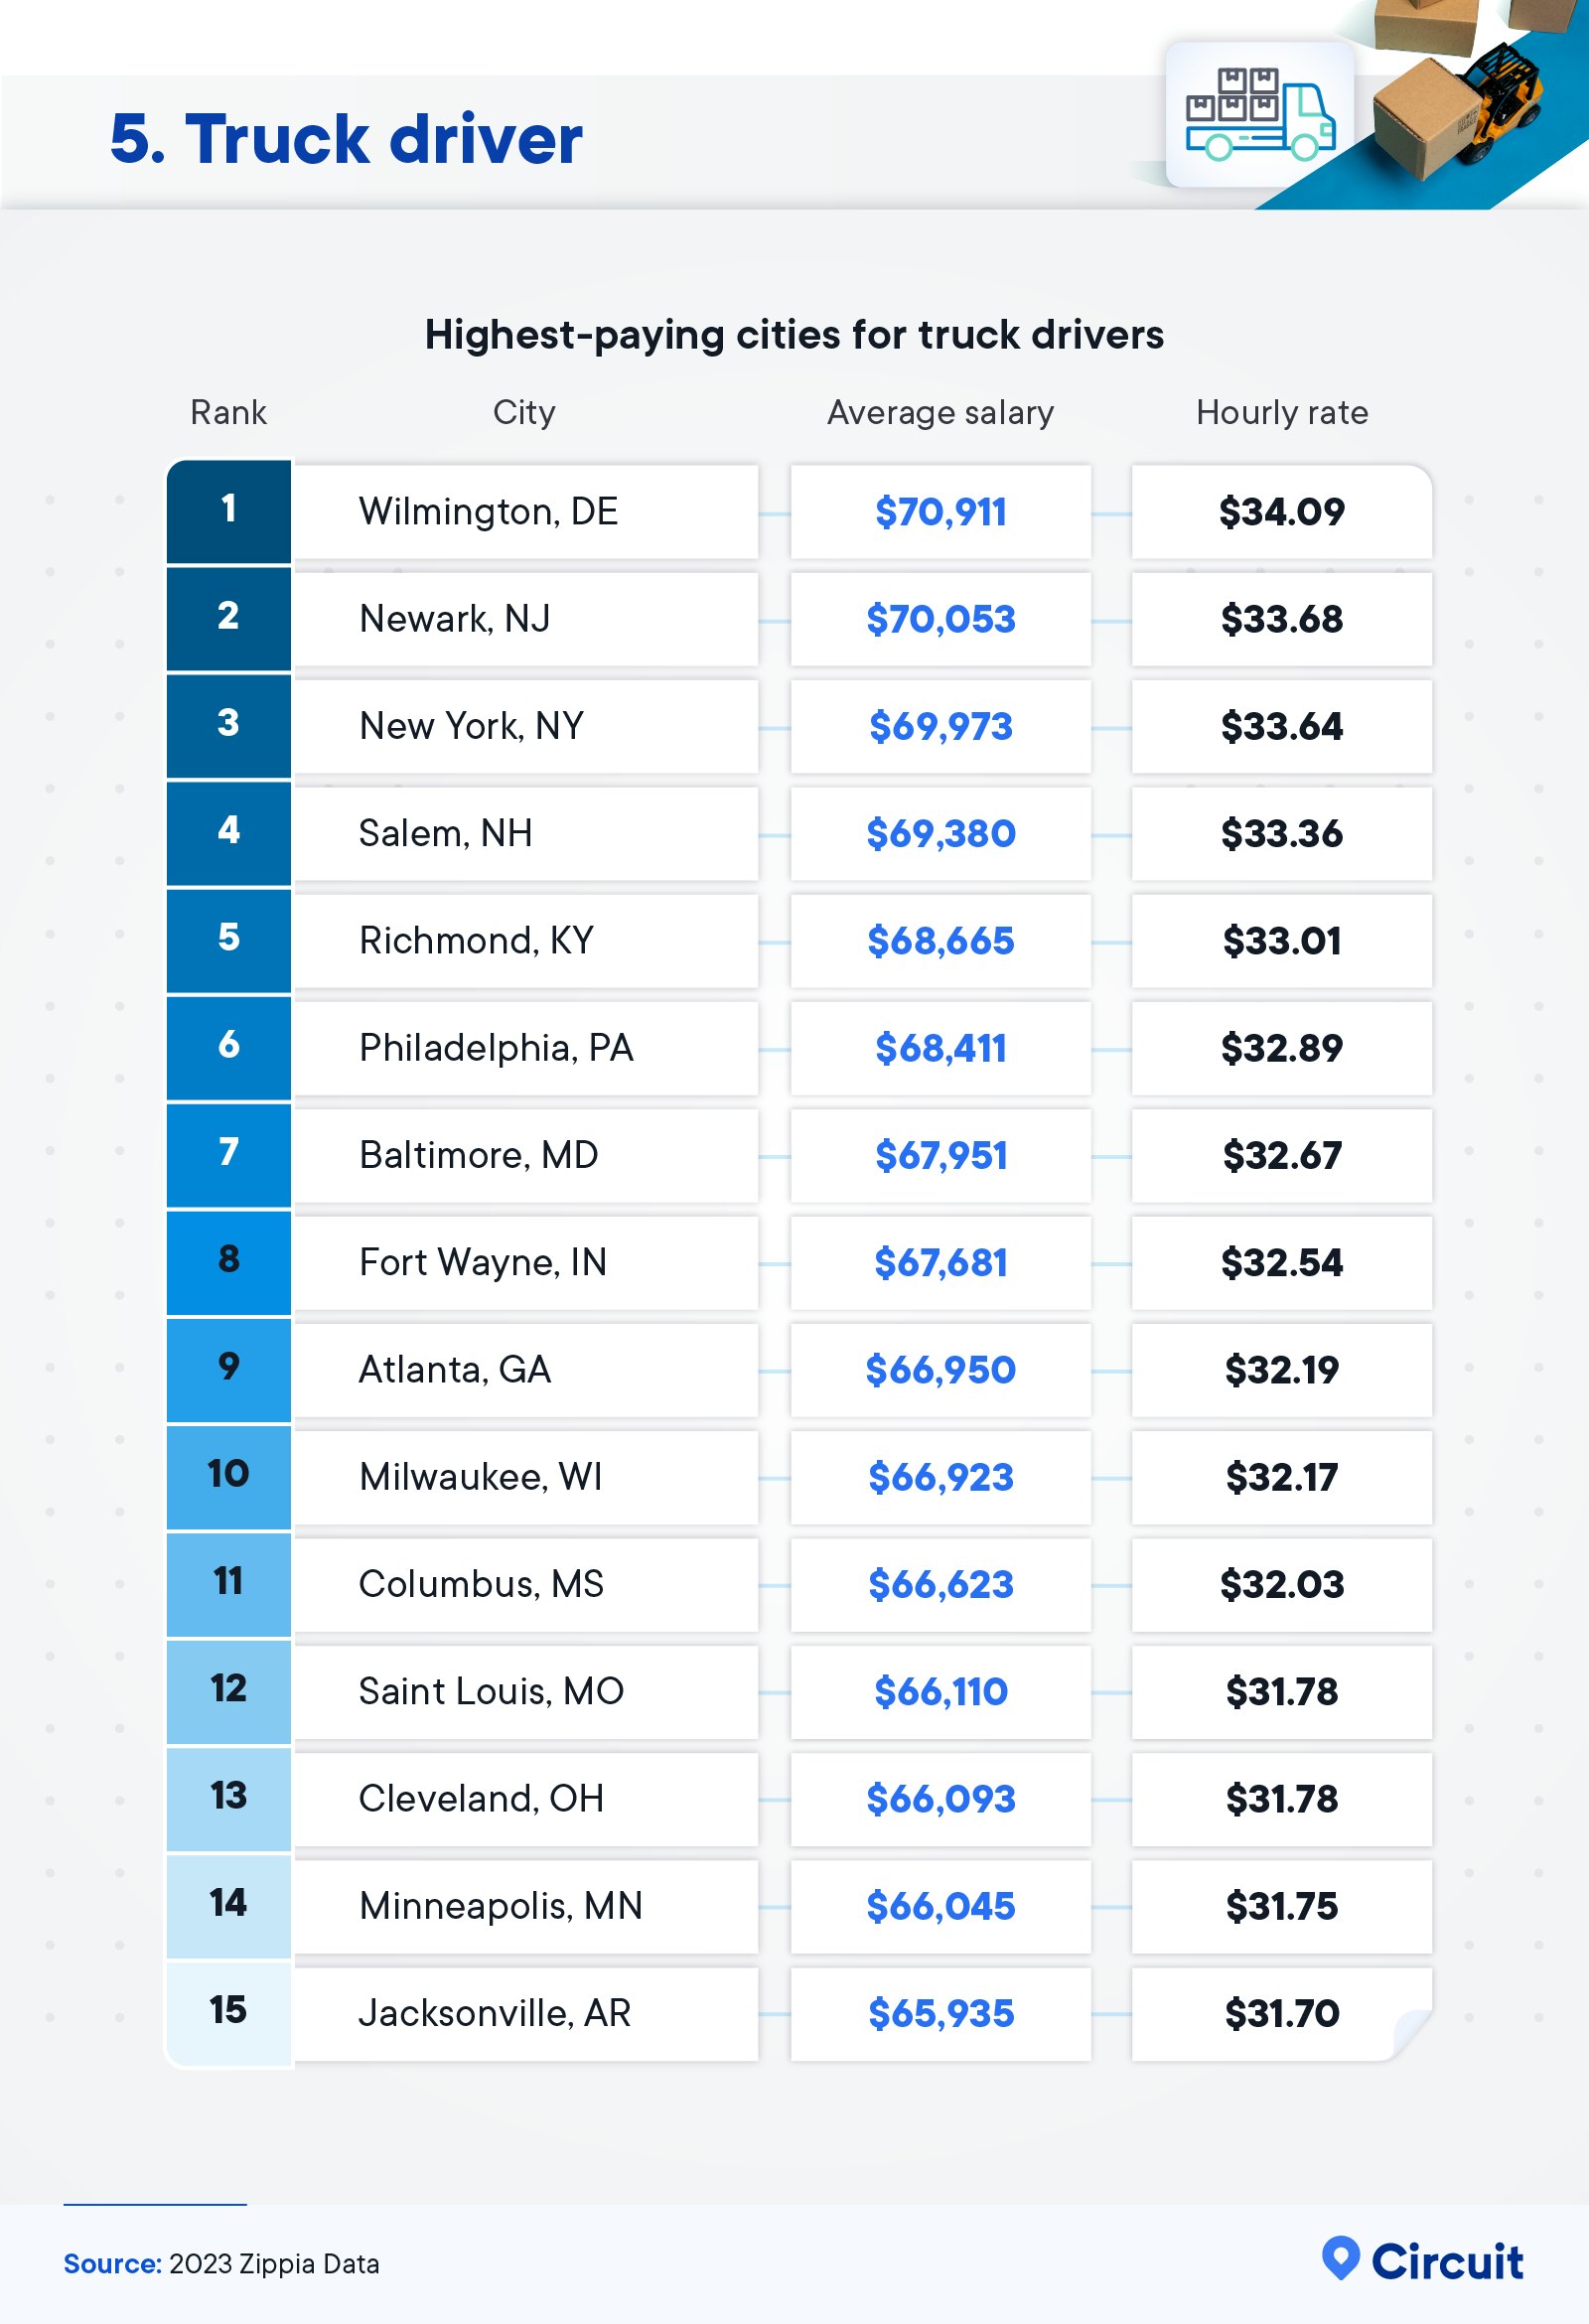 Highest-paying cities for truck drivers